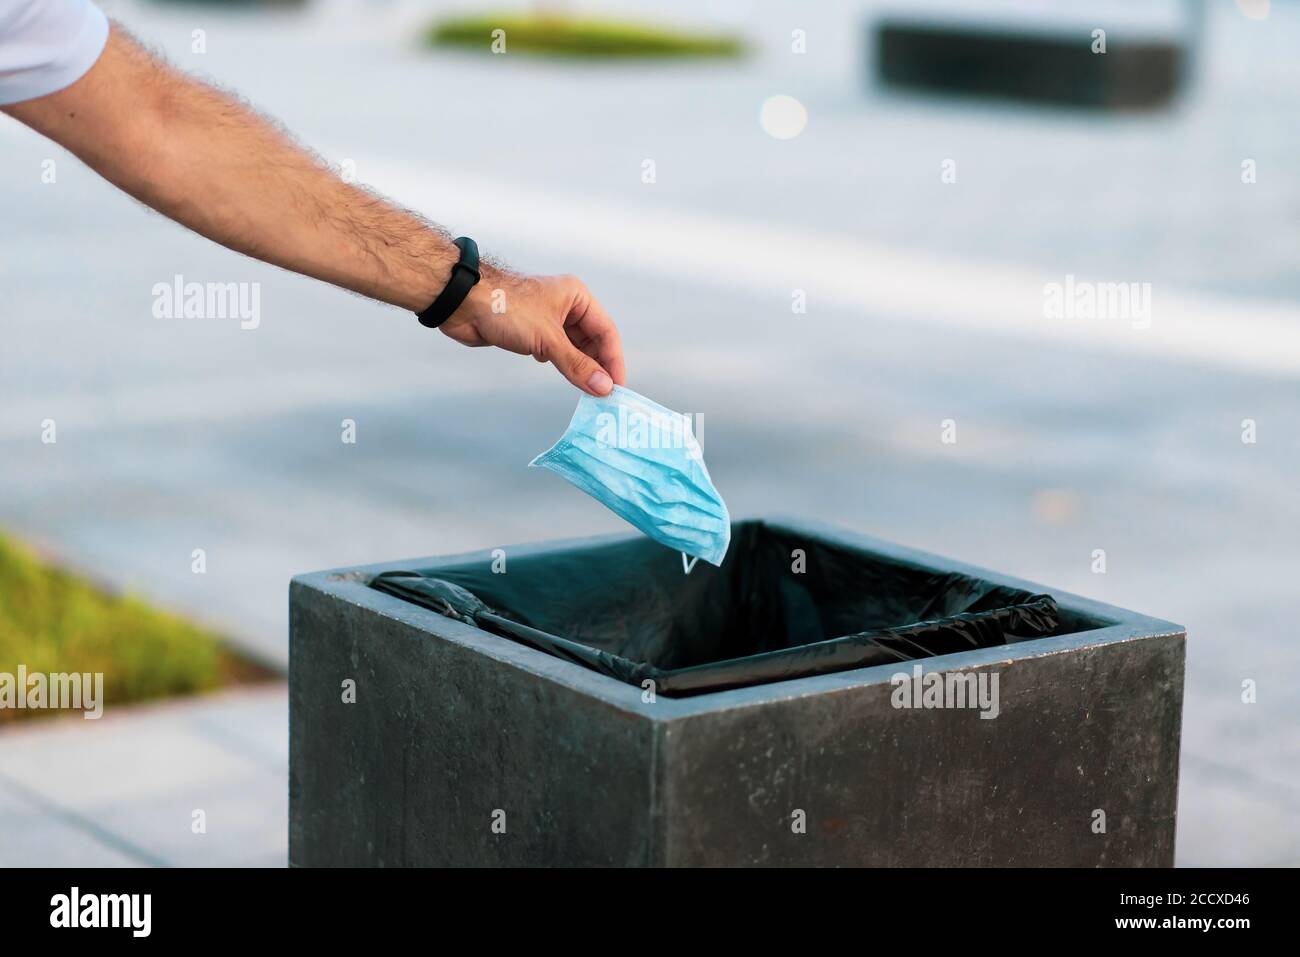 Man throwing used disposable protective surgical mask into the garbage bin closeup Stock Photo